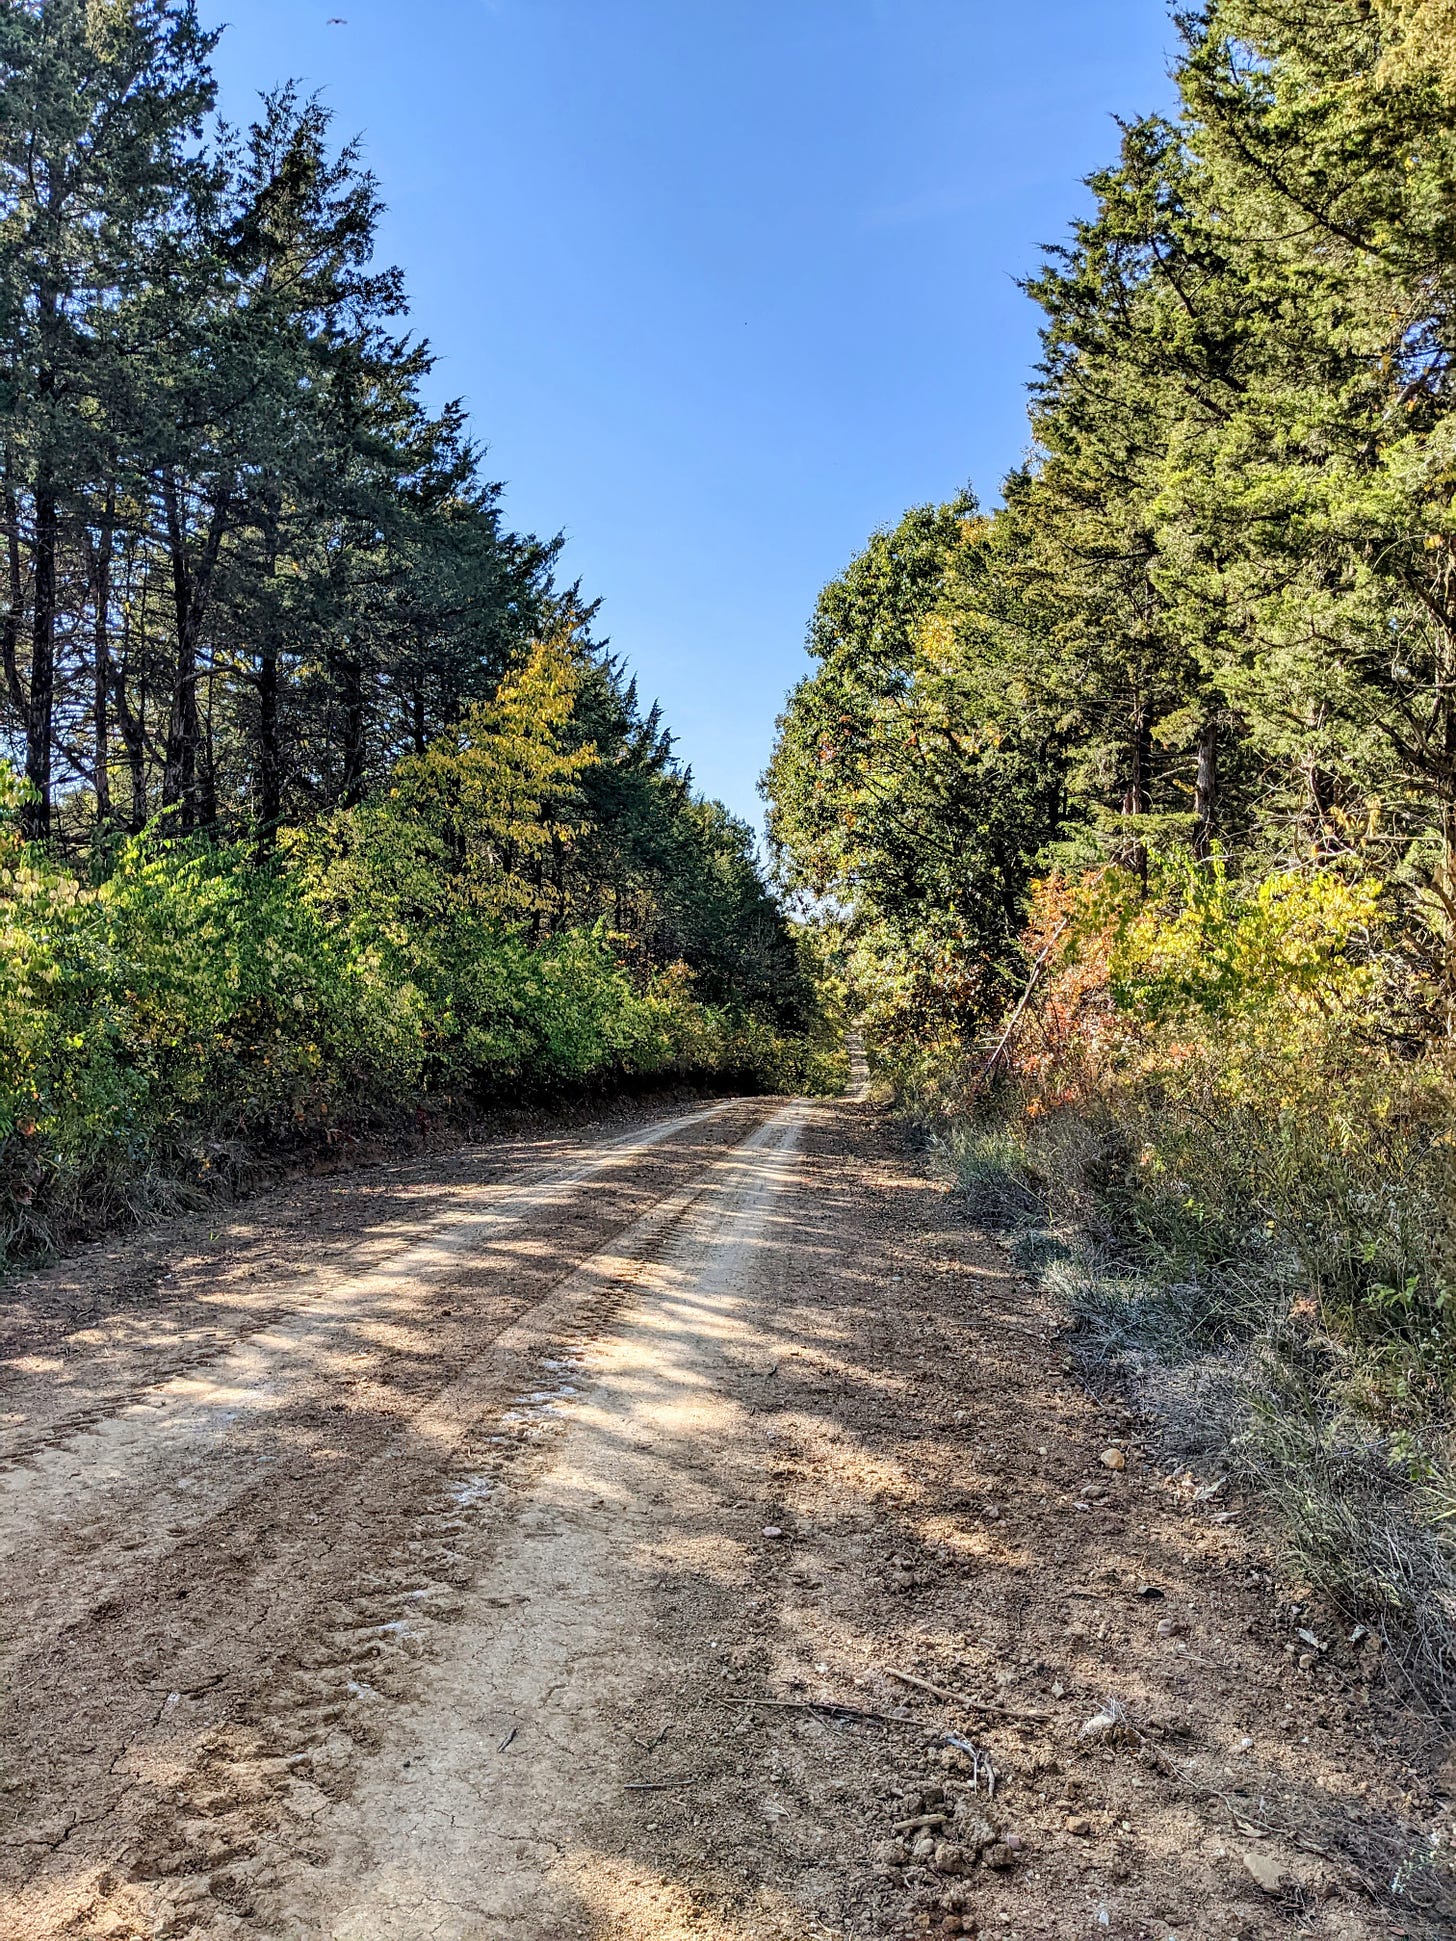 A dirt road with tall trees on either side